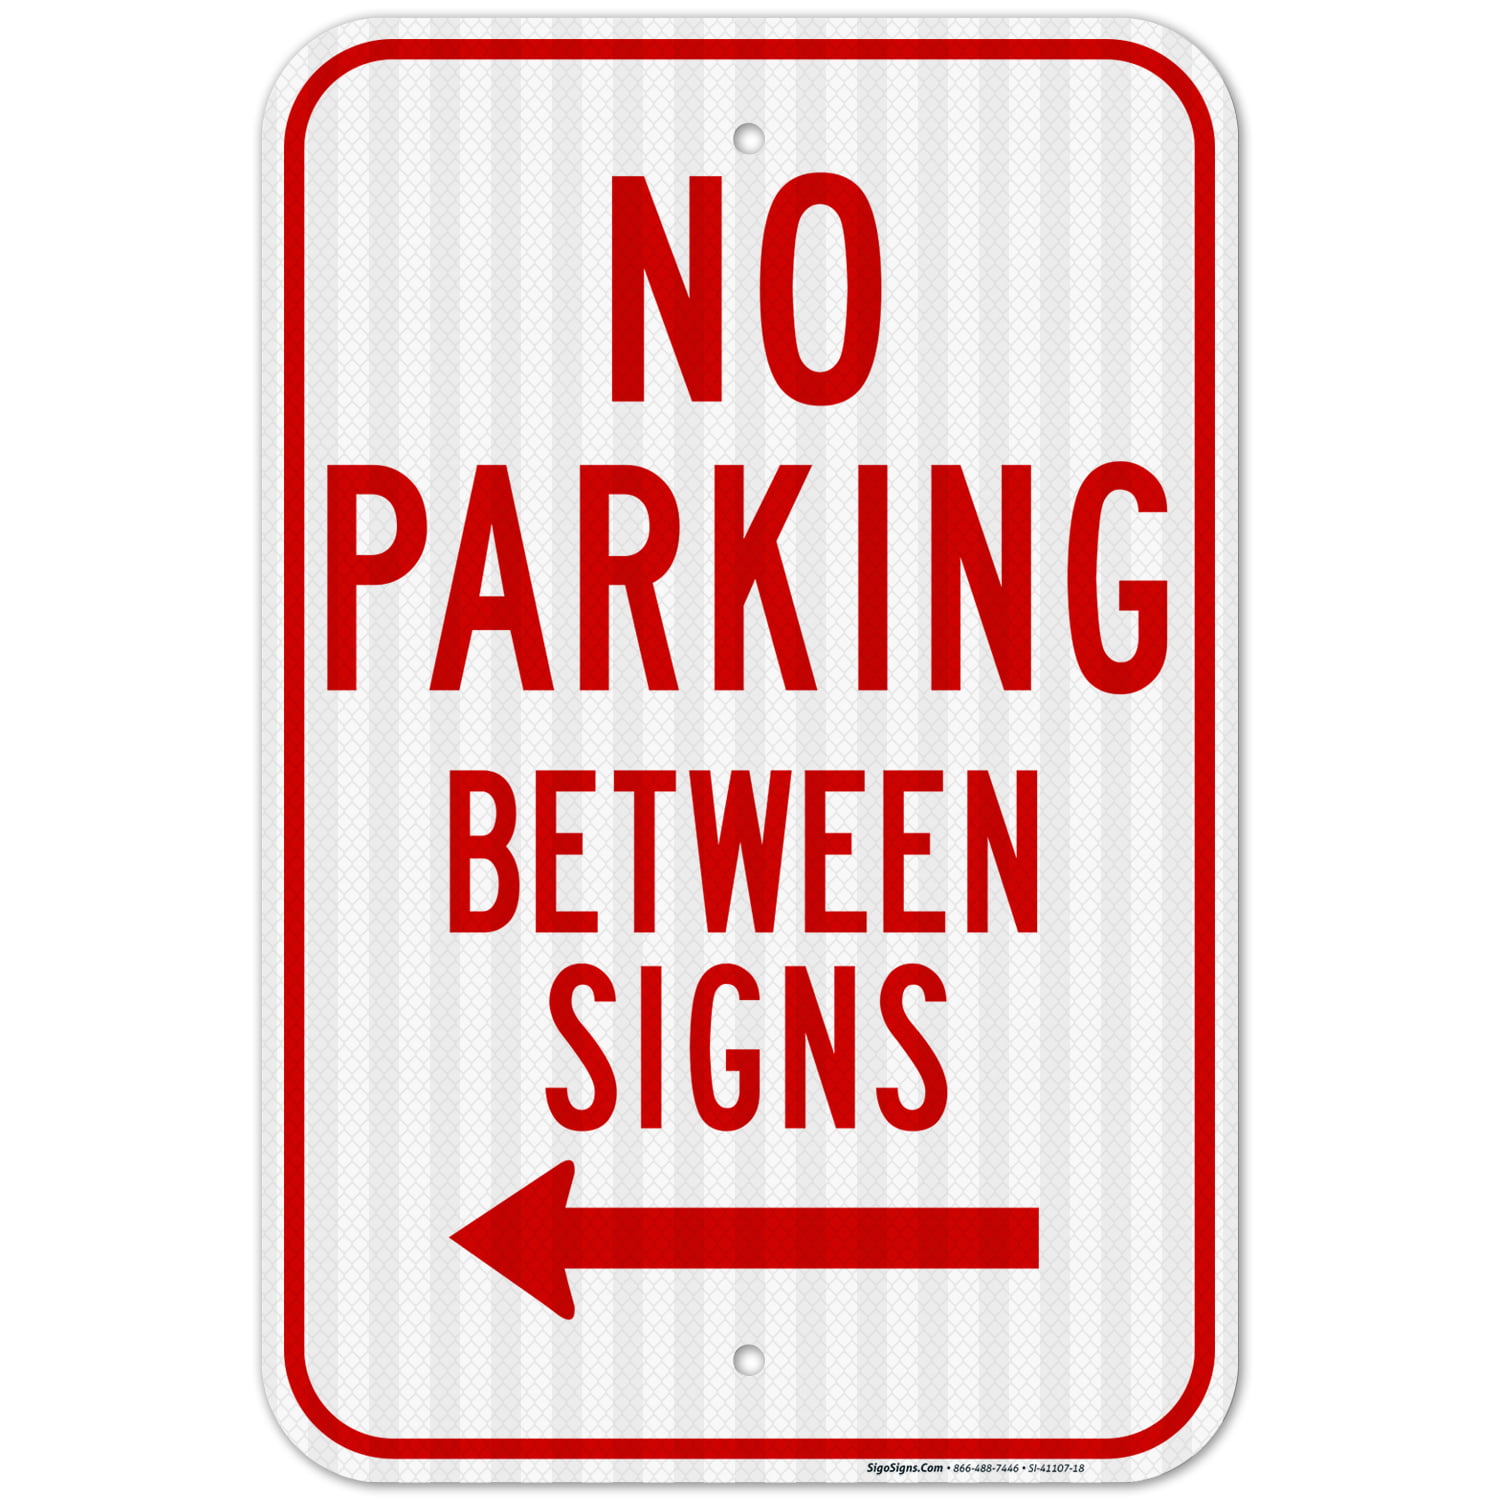 No Parking w/Symbol 12x18 EGP Reflective Aluminum Sign Made in USA 7-10 Yr Life! 